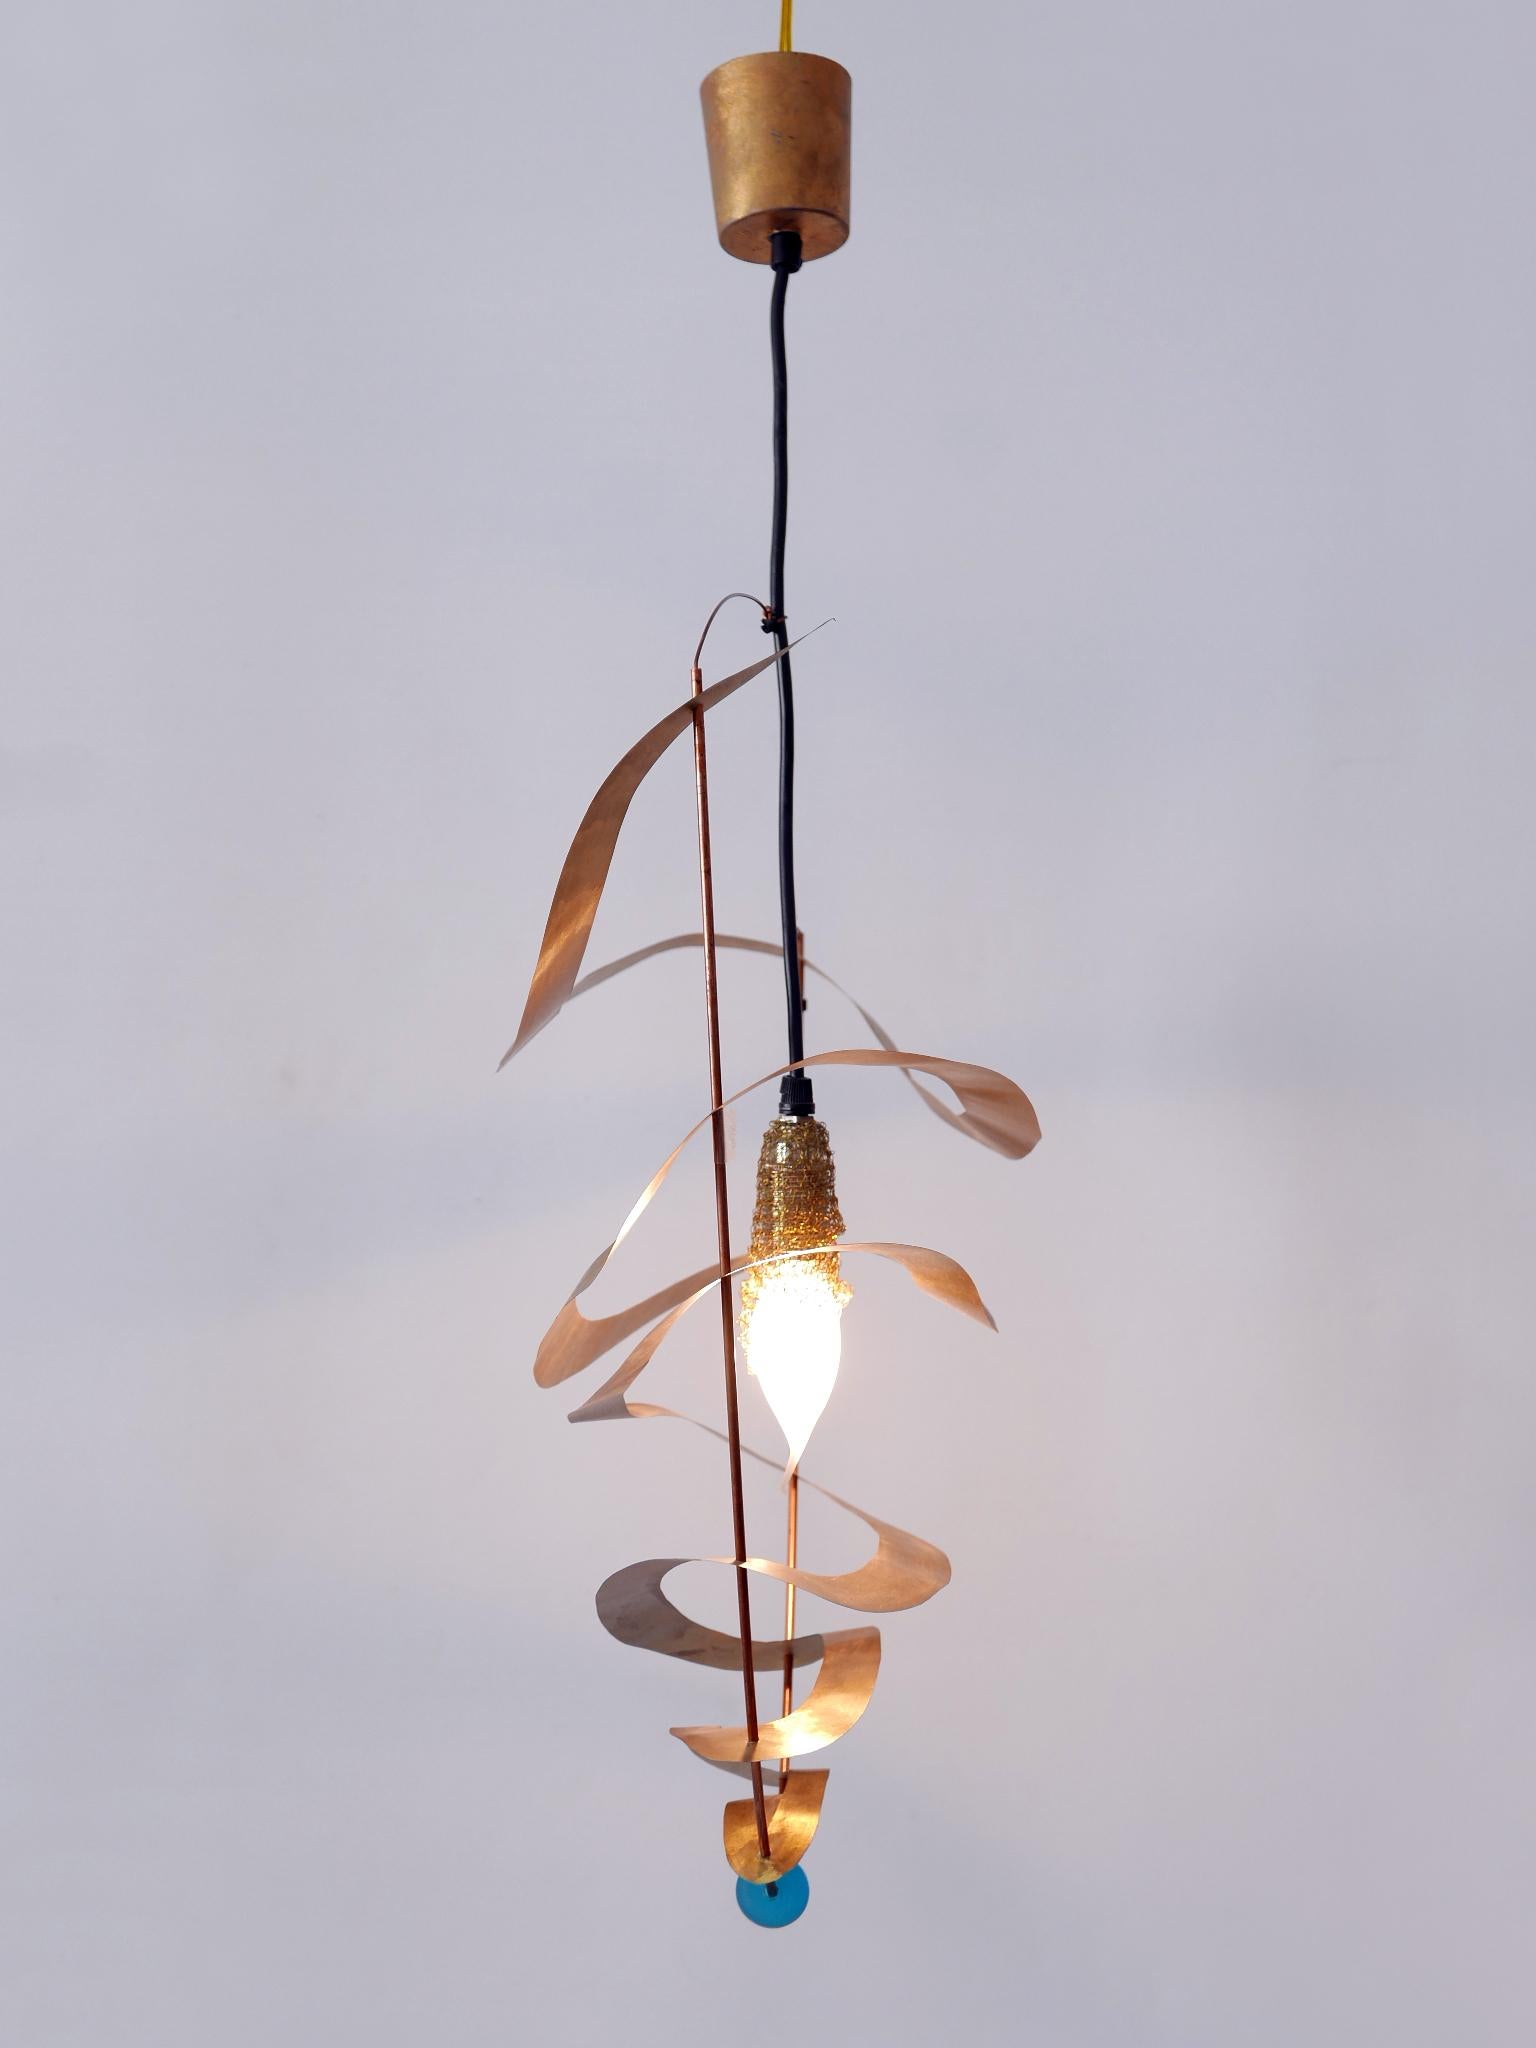 Amazing & Highly Decorative Postmodern Pendant Lamp or Hanging Light Italy 1980s For Sale 11